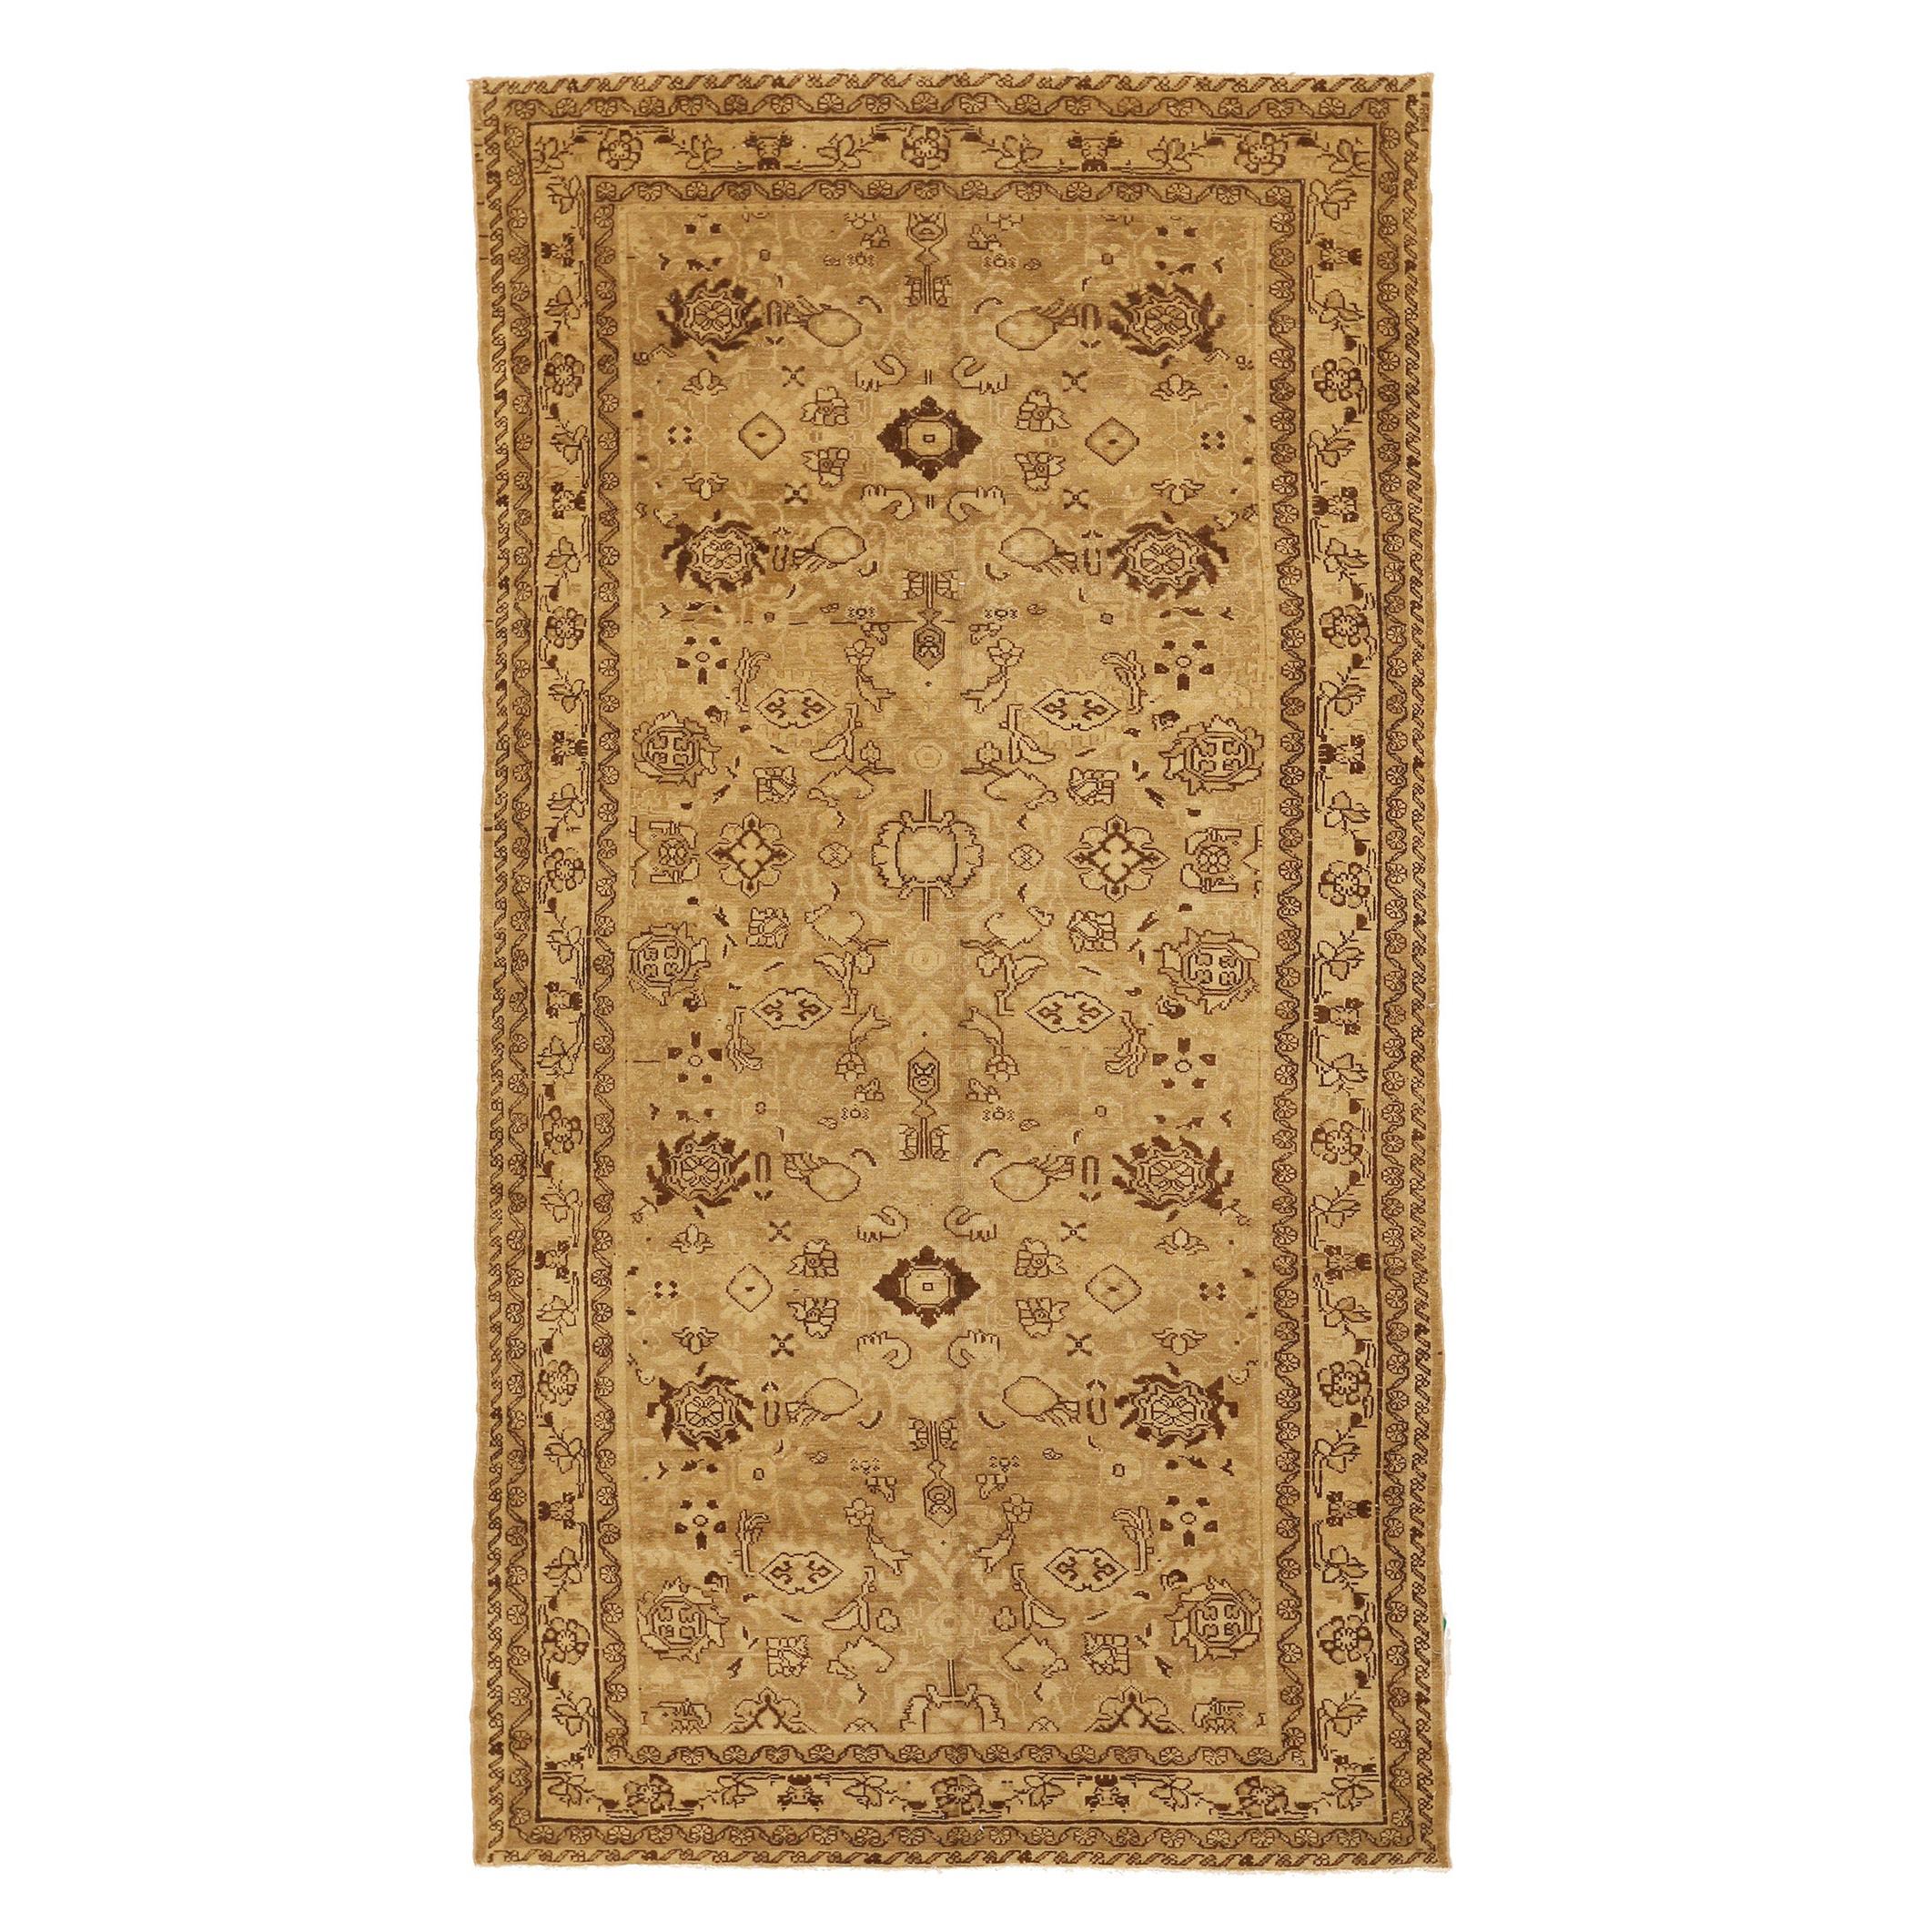 Antique Persian Malayer Rug with Brown Floral Details on Beige Field